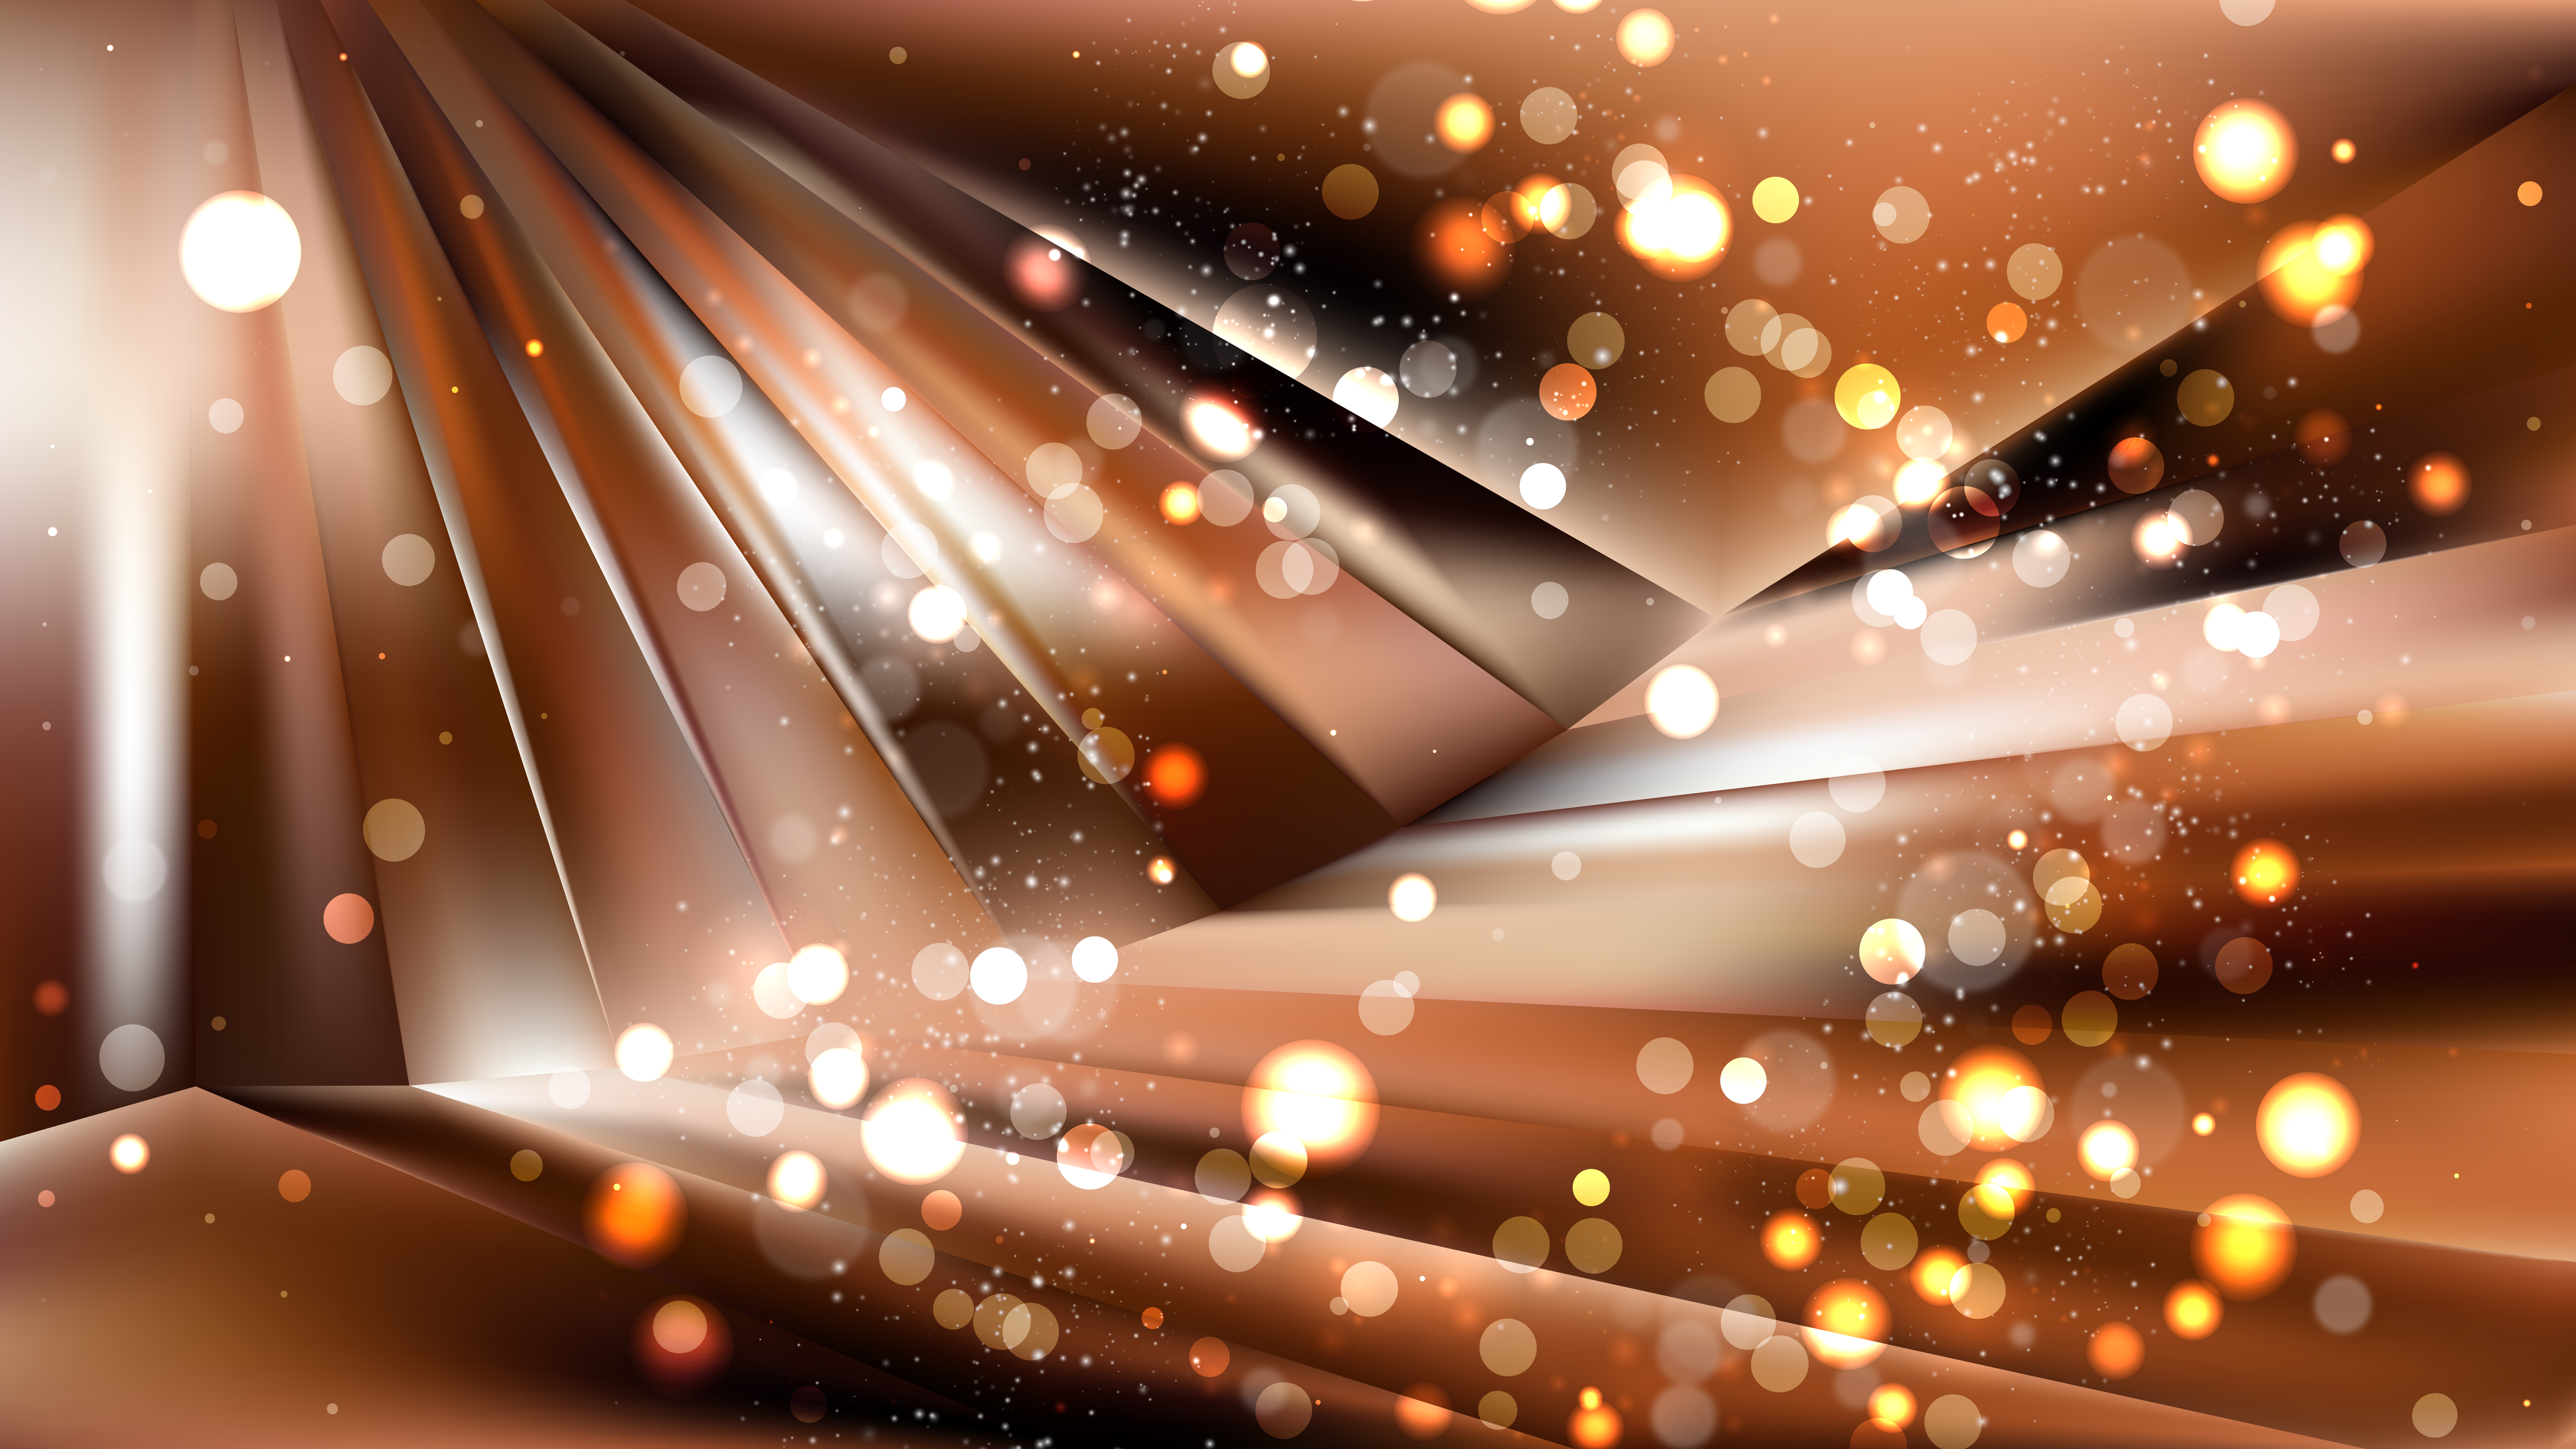 Abstract Copper Color Lights Background Design